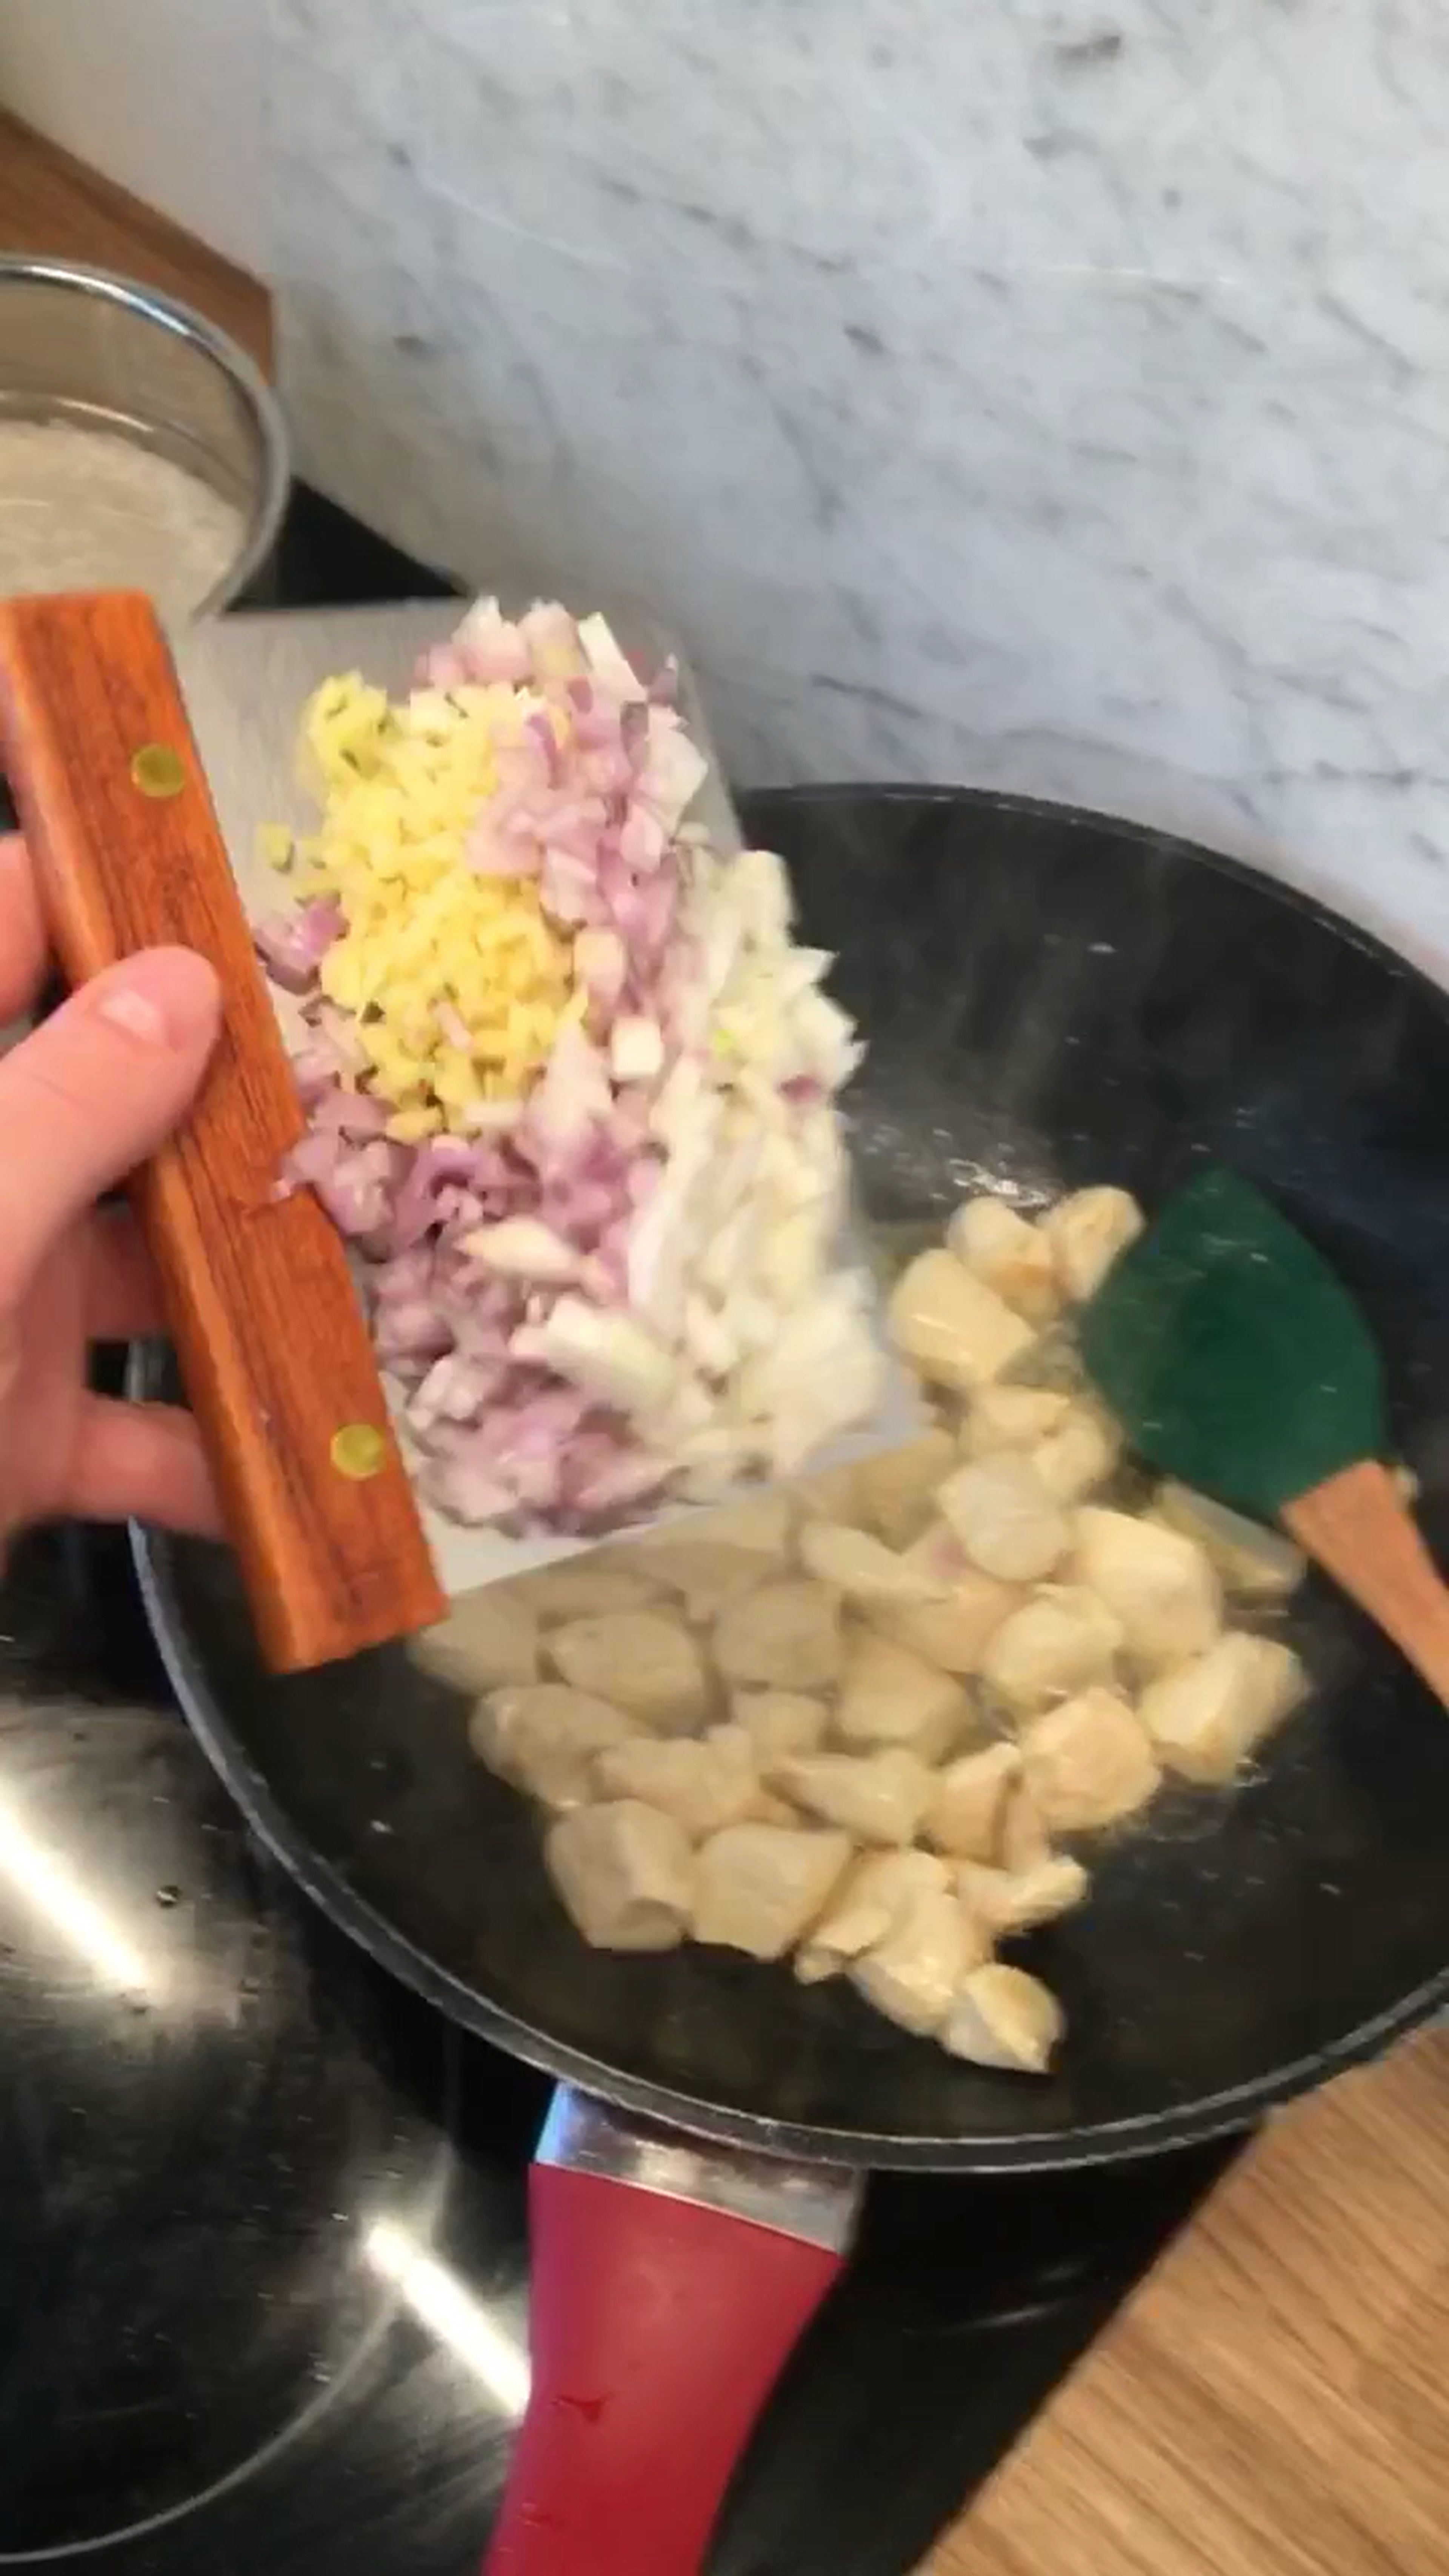 Add shallots, garlic, and ginger and fry for 1 min.